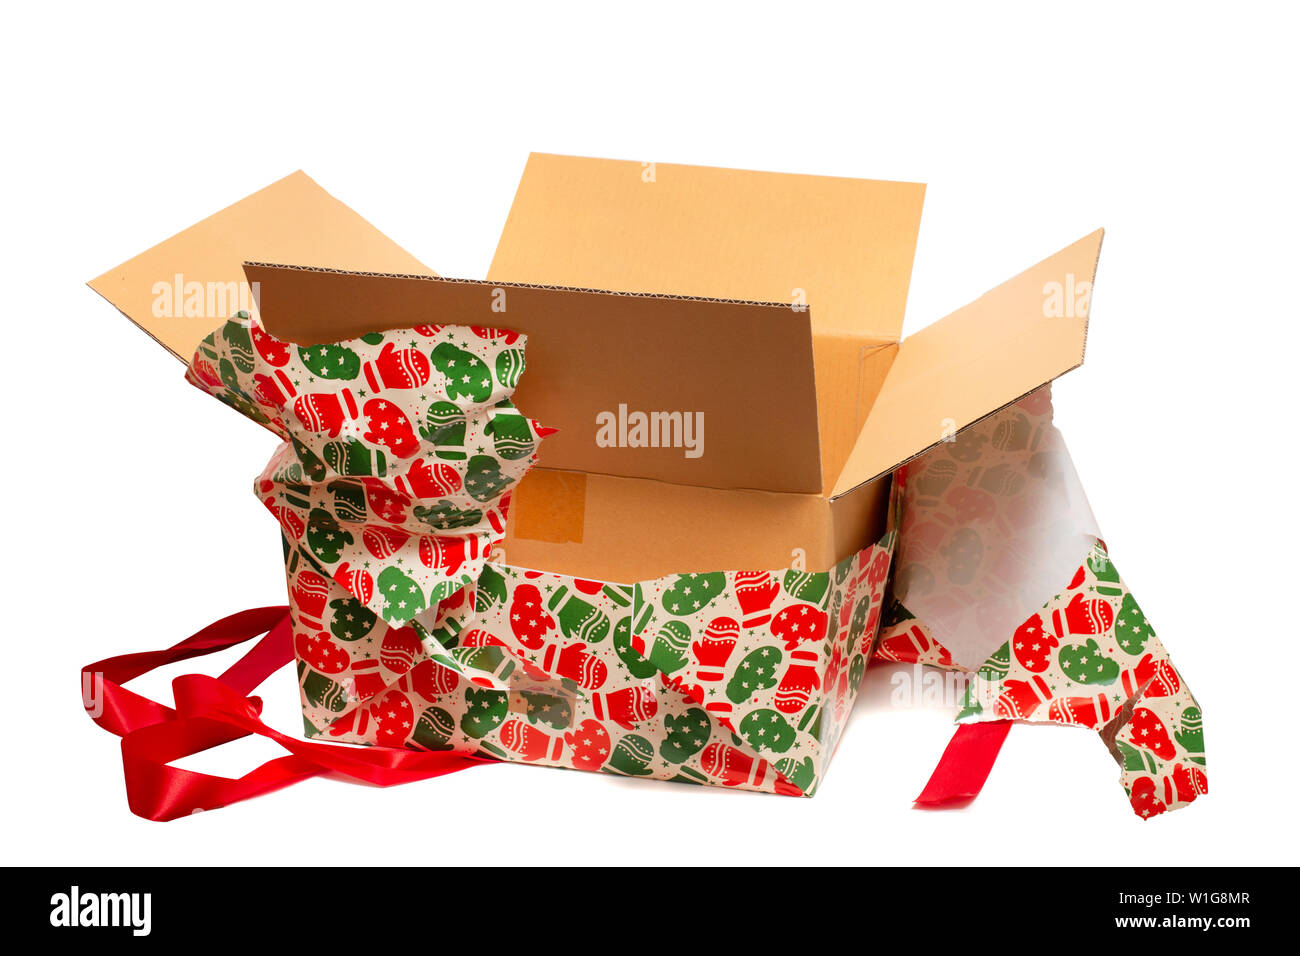 Beatifully wrapped present being unwrapped isolated on a white background. Stock Photo